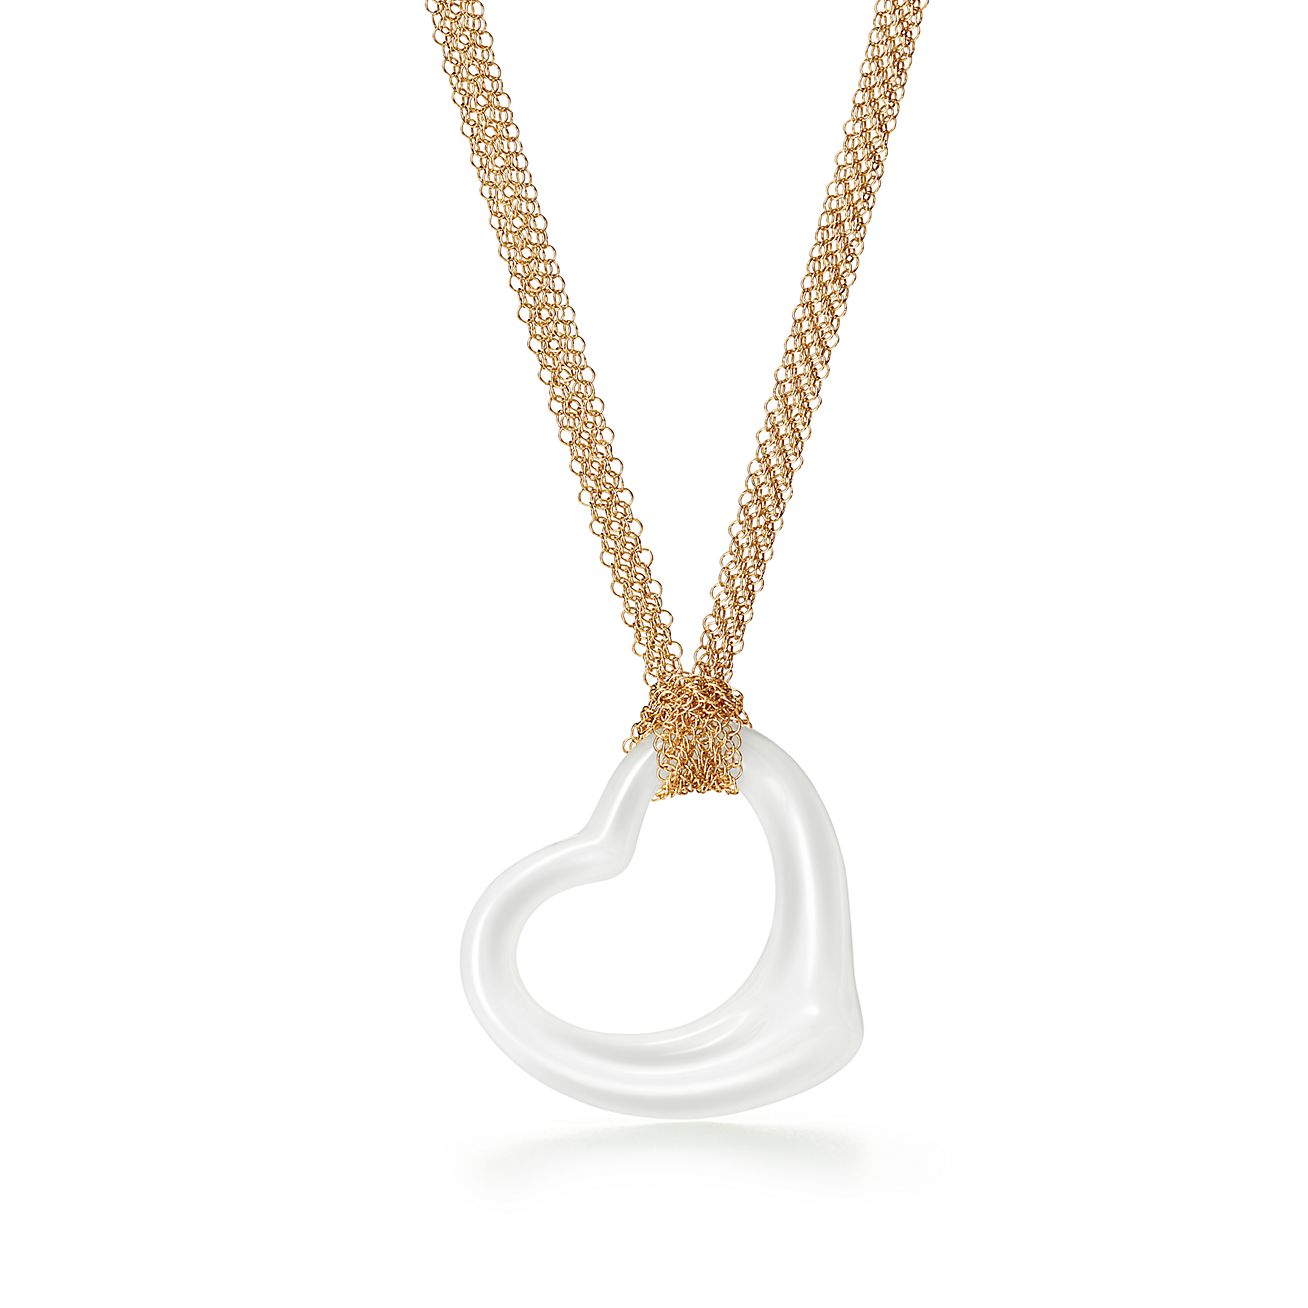 tiffany white gold heart necklace